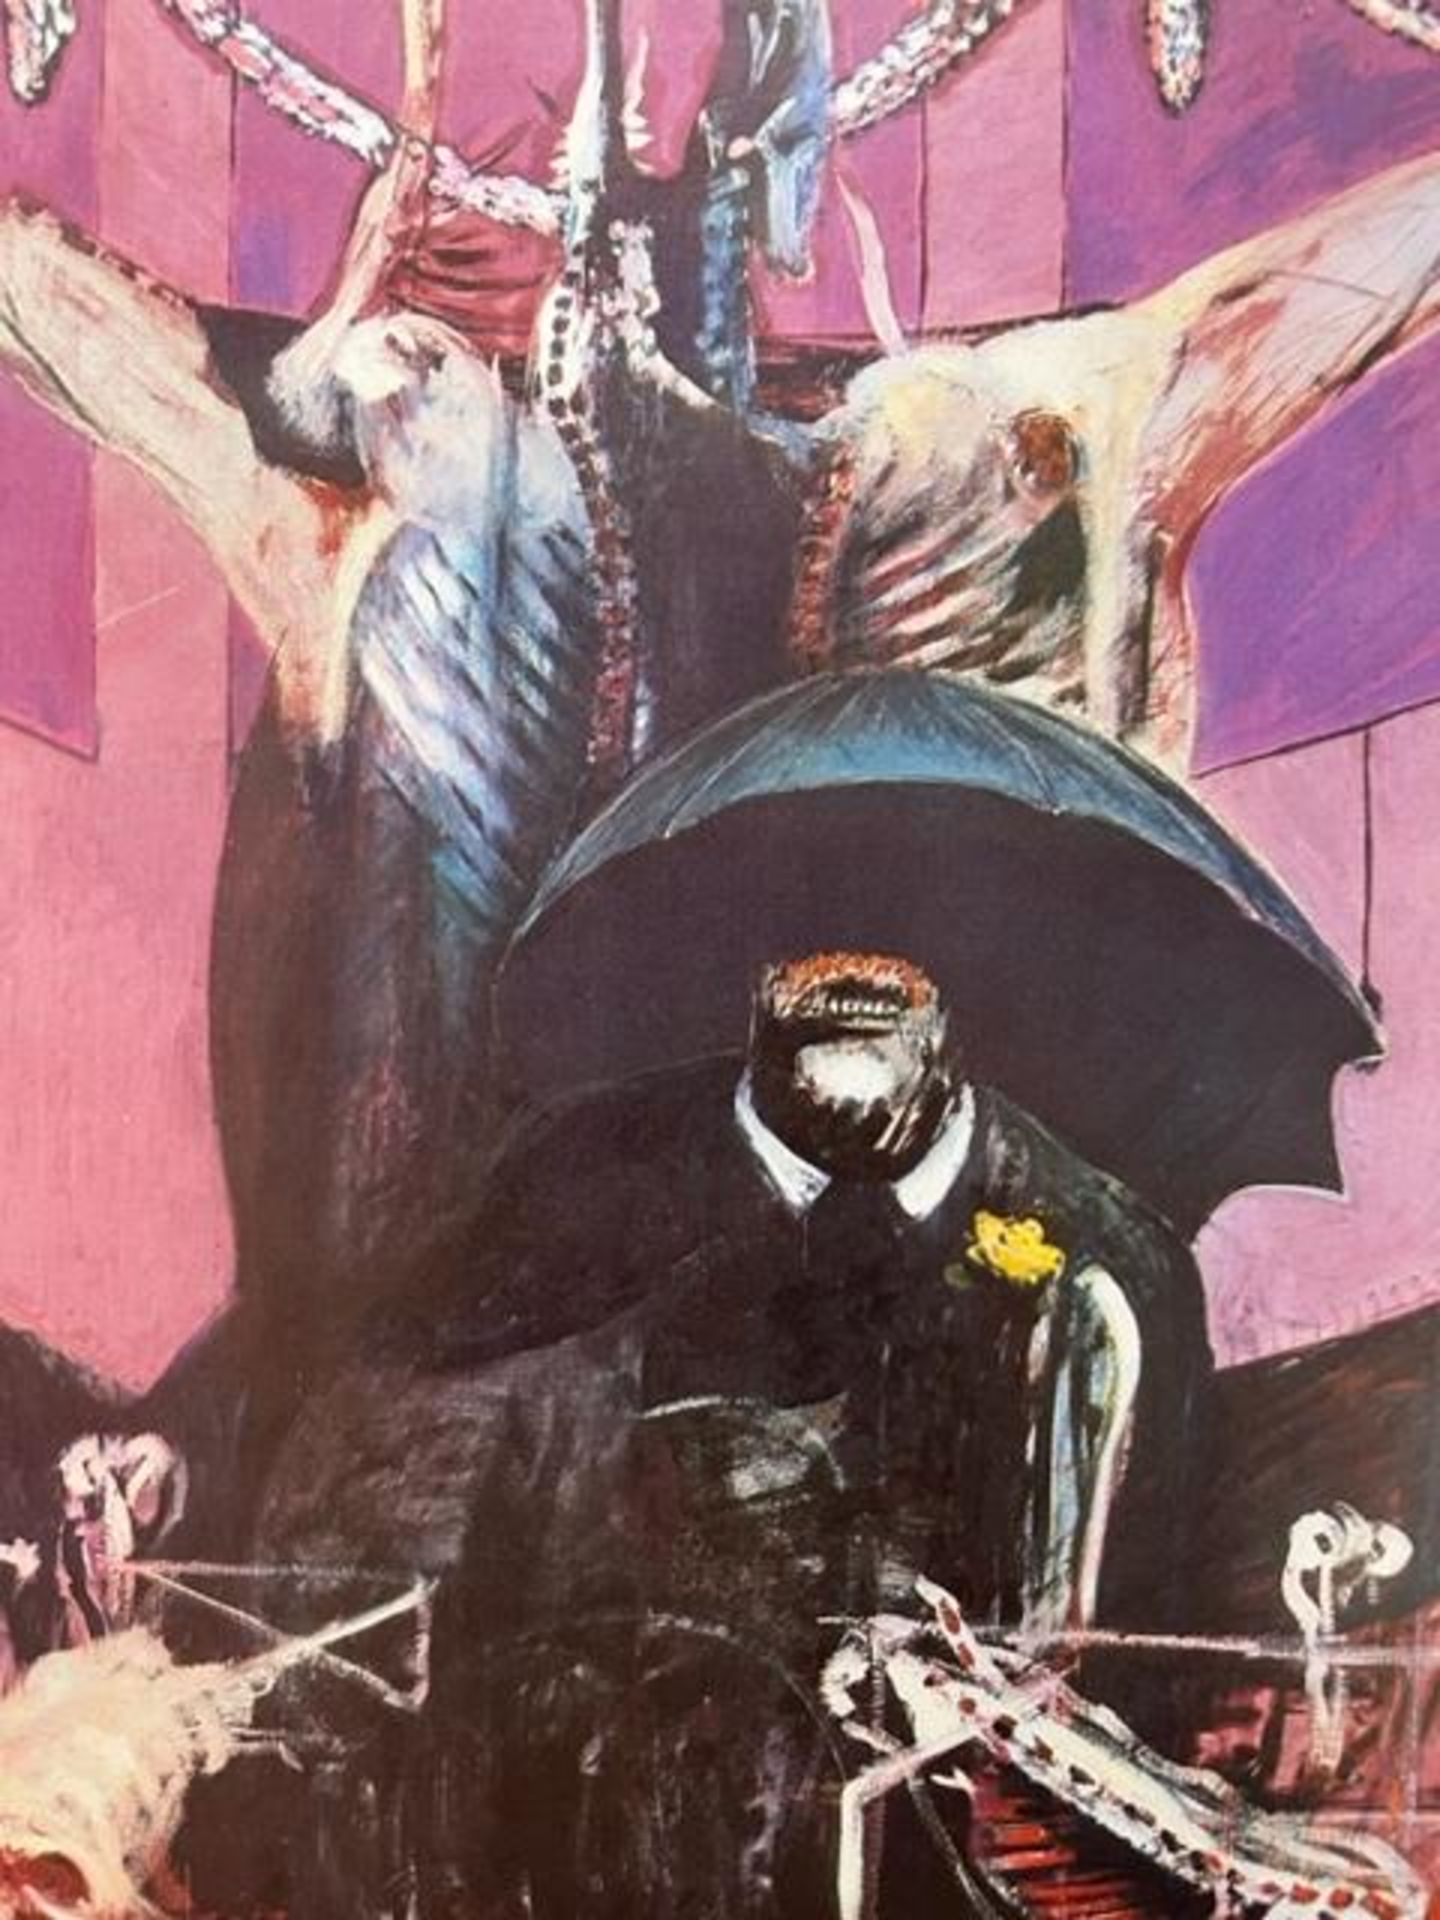 Francis Bacon "Painting" Print. - Image 3 of 12